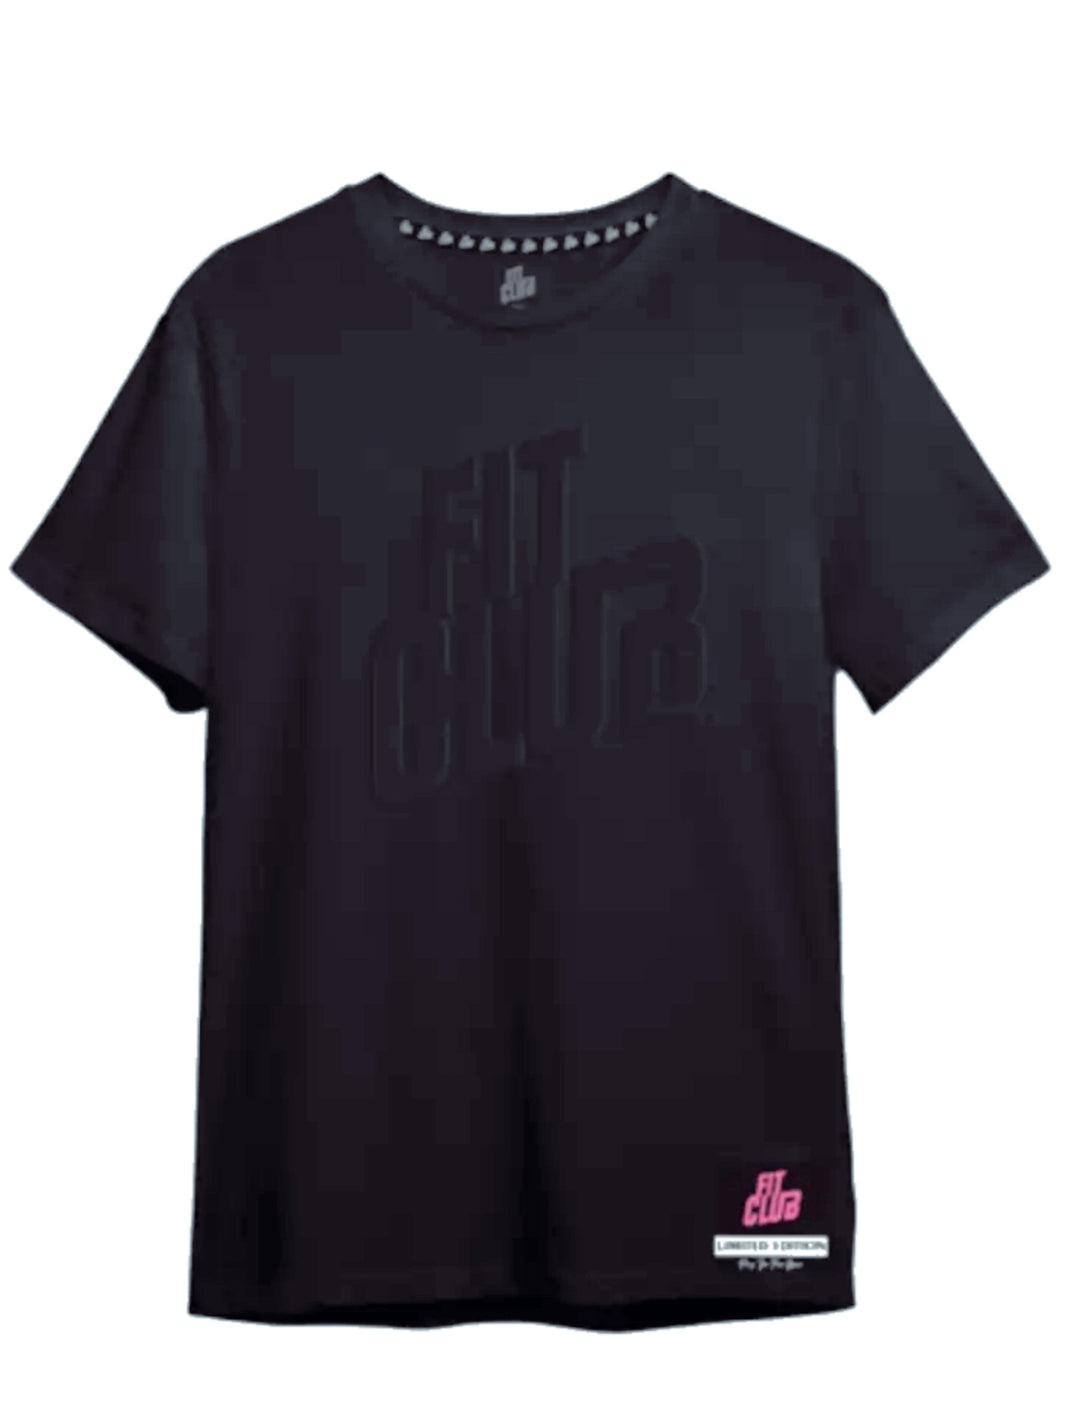 Fit Club Embossed T-Shirt